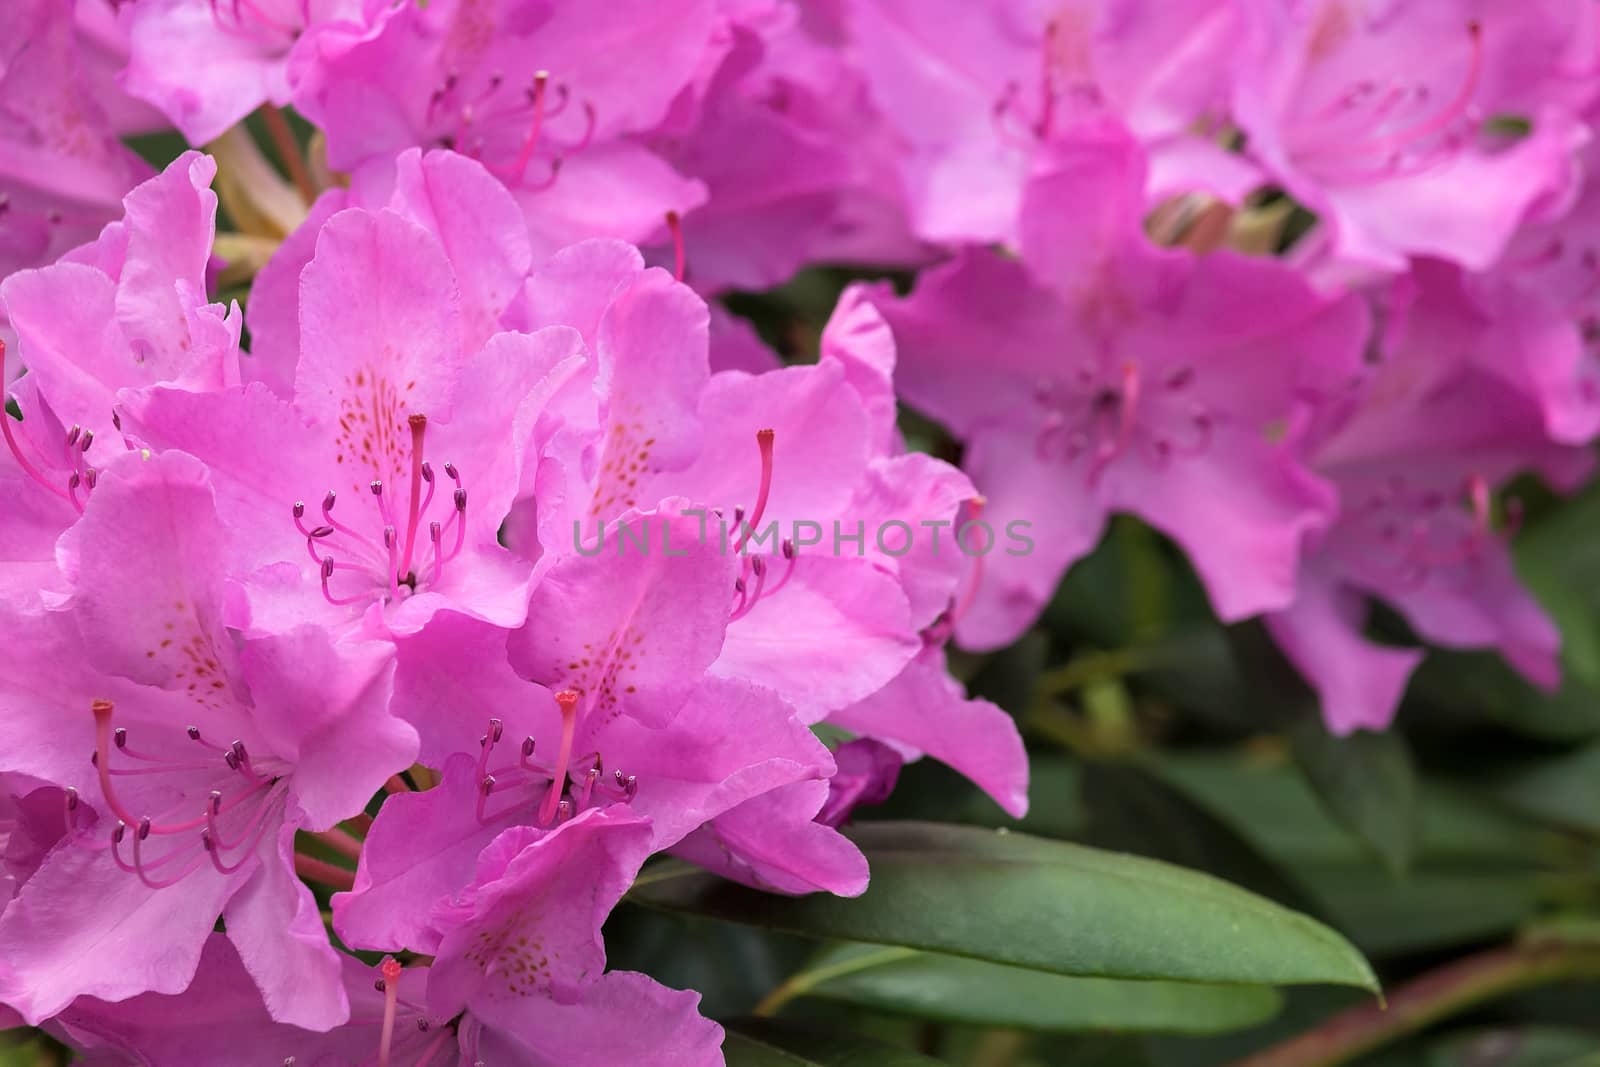 Pink Rhododendron Flowers in Bloom by jpldesigns